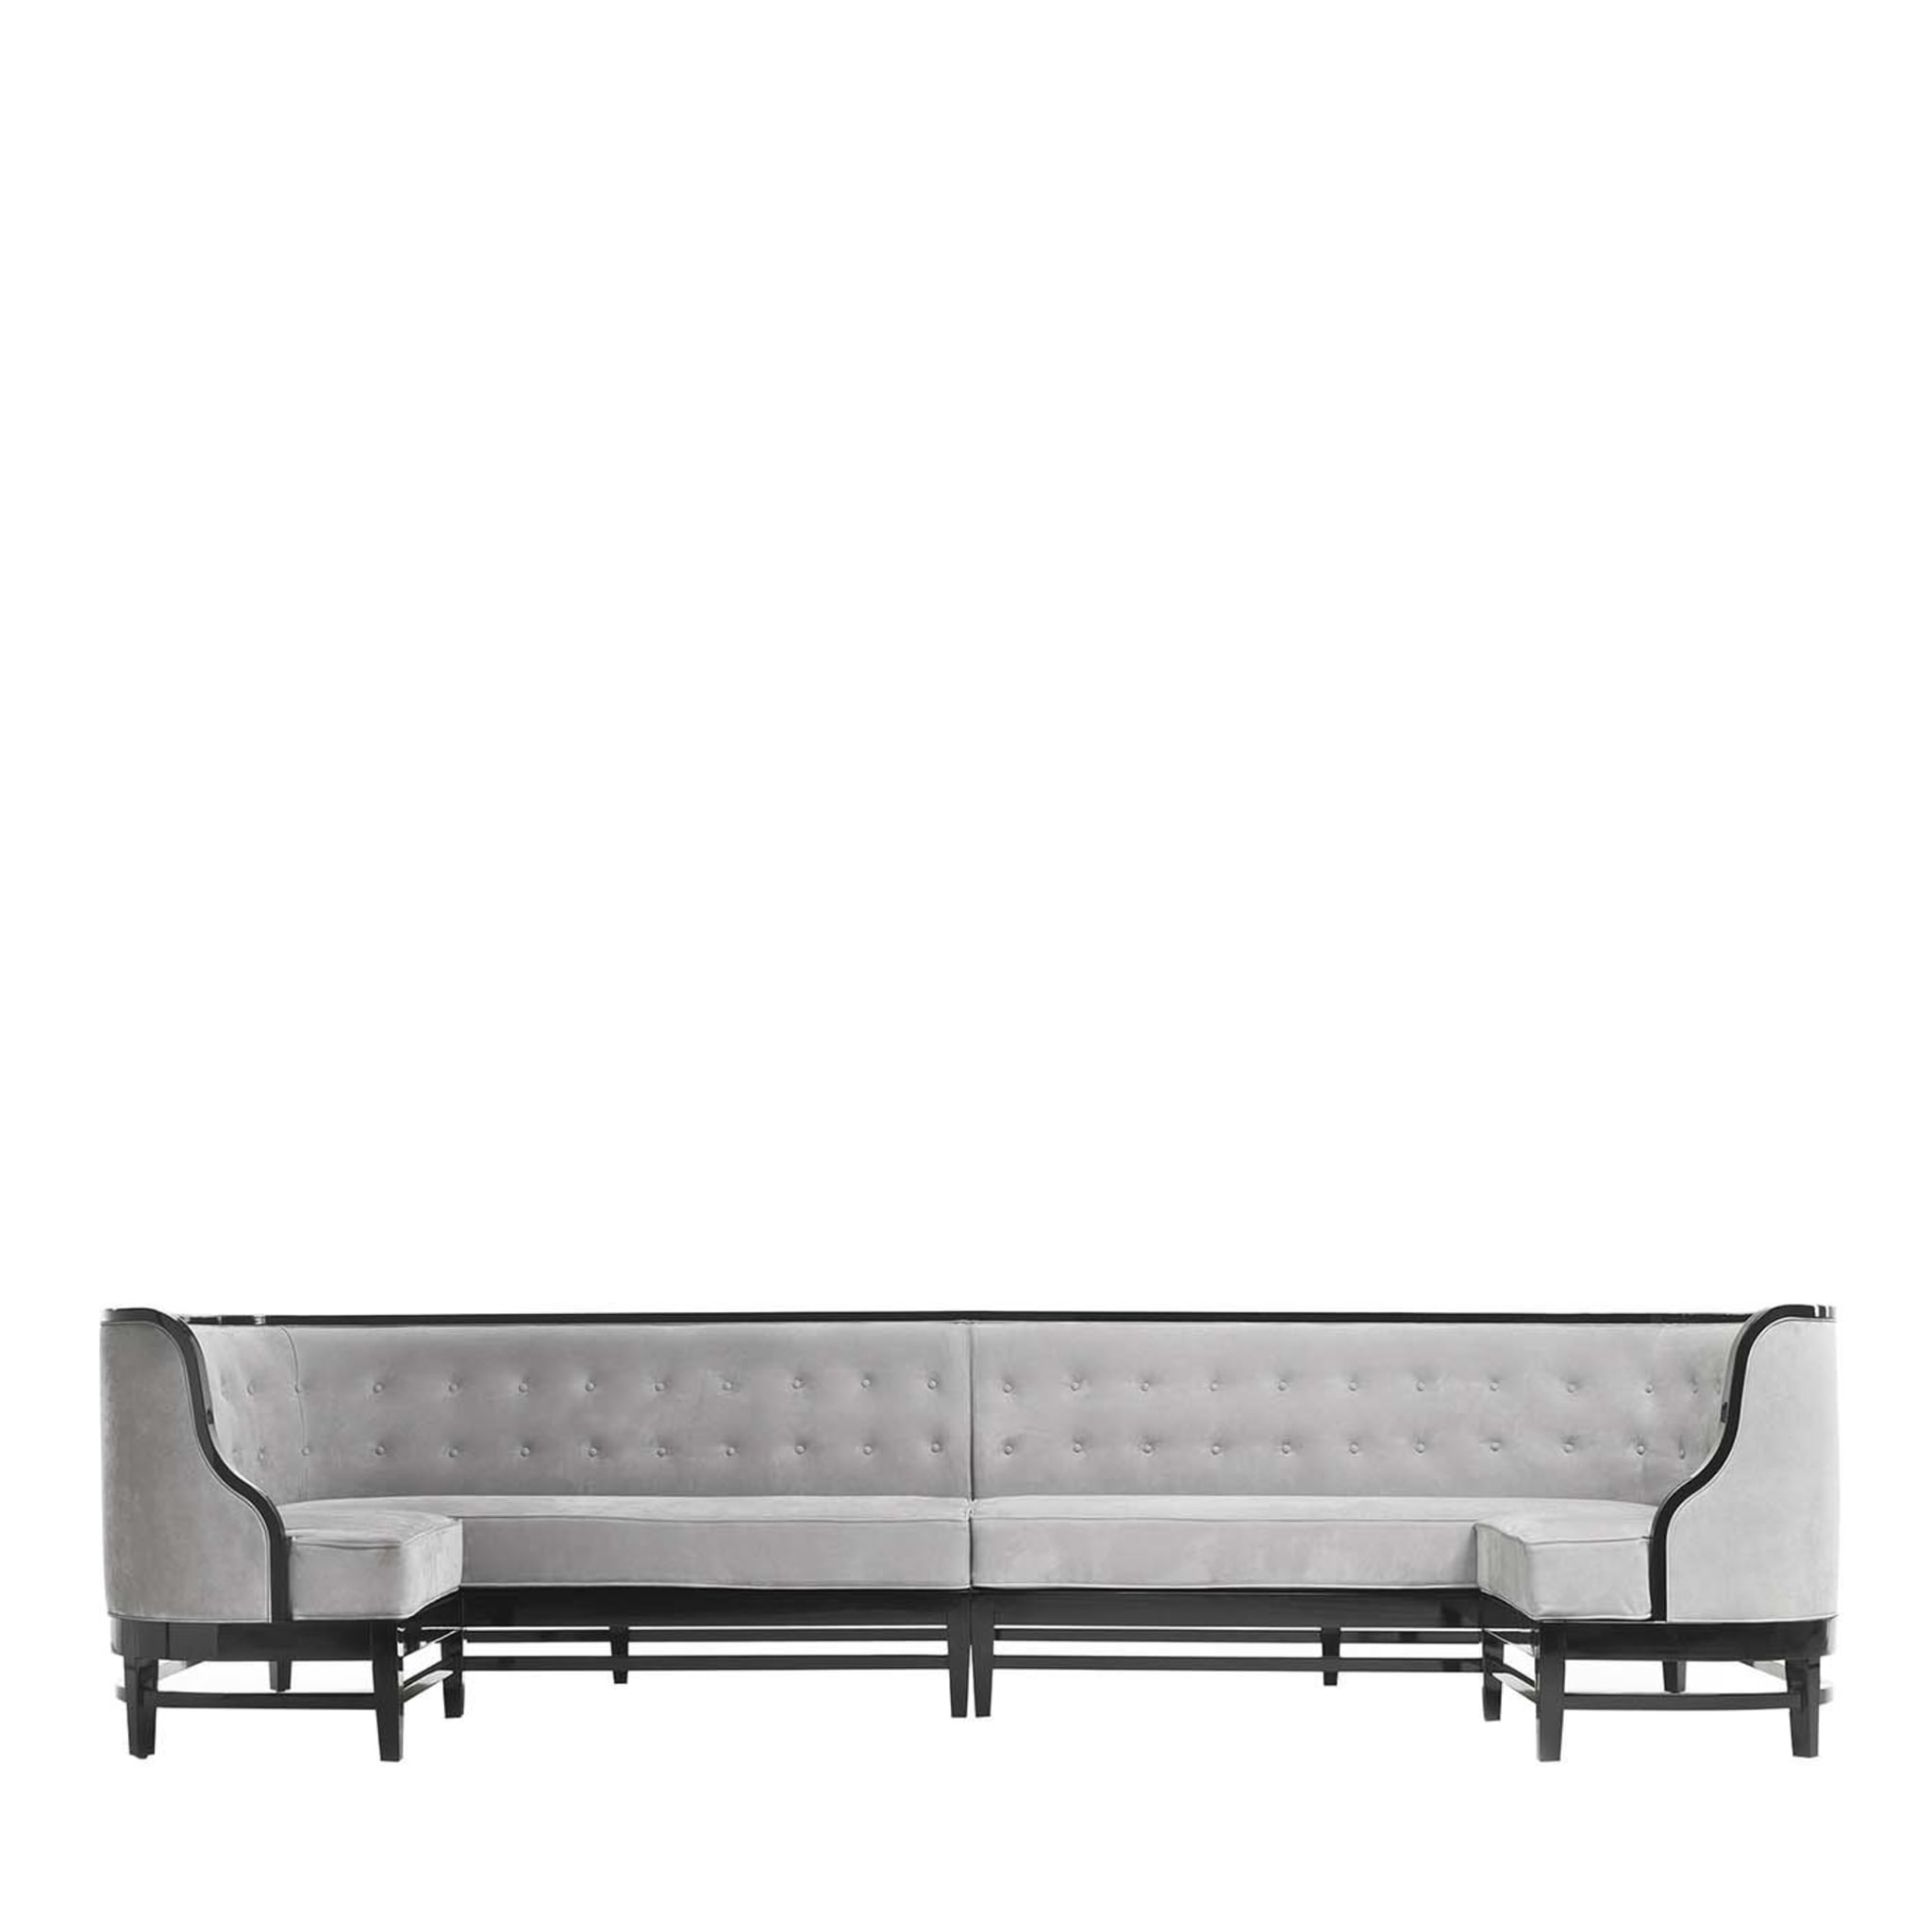 Siparia Sofa by Archer Humphryes Architects - Main view